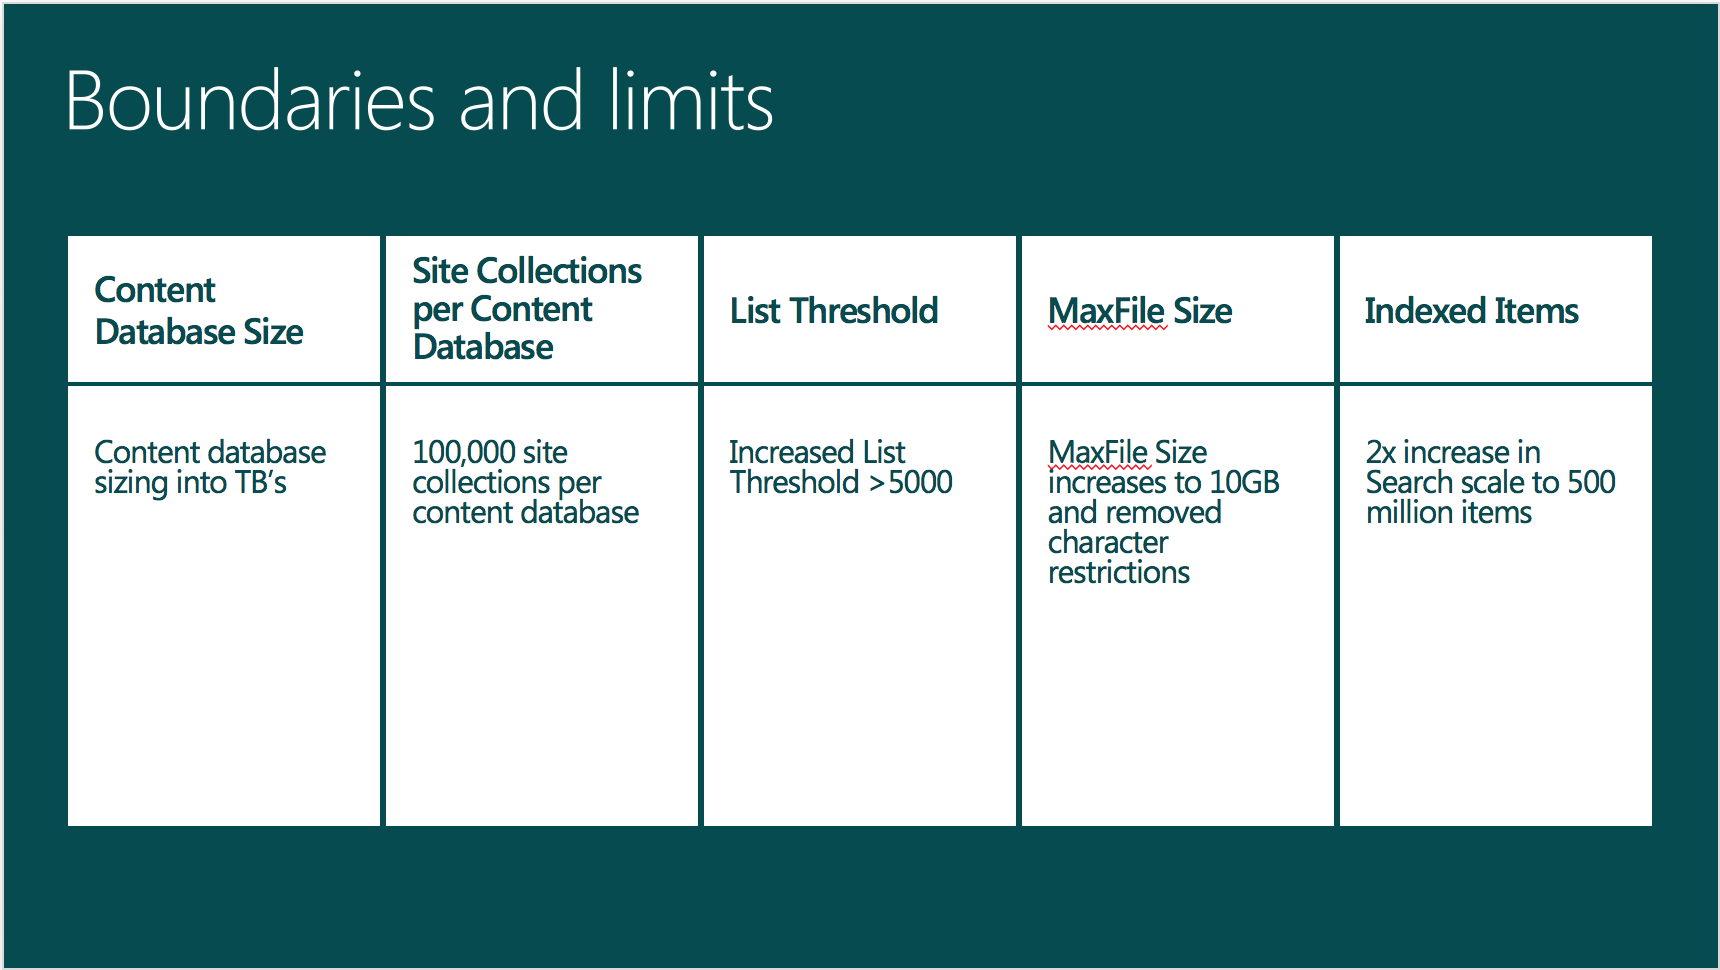 SharePoint 2016 boundries and limits